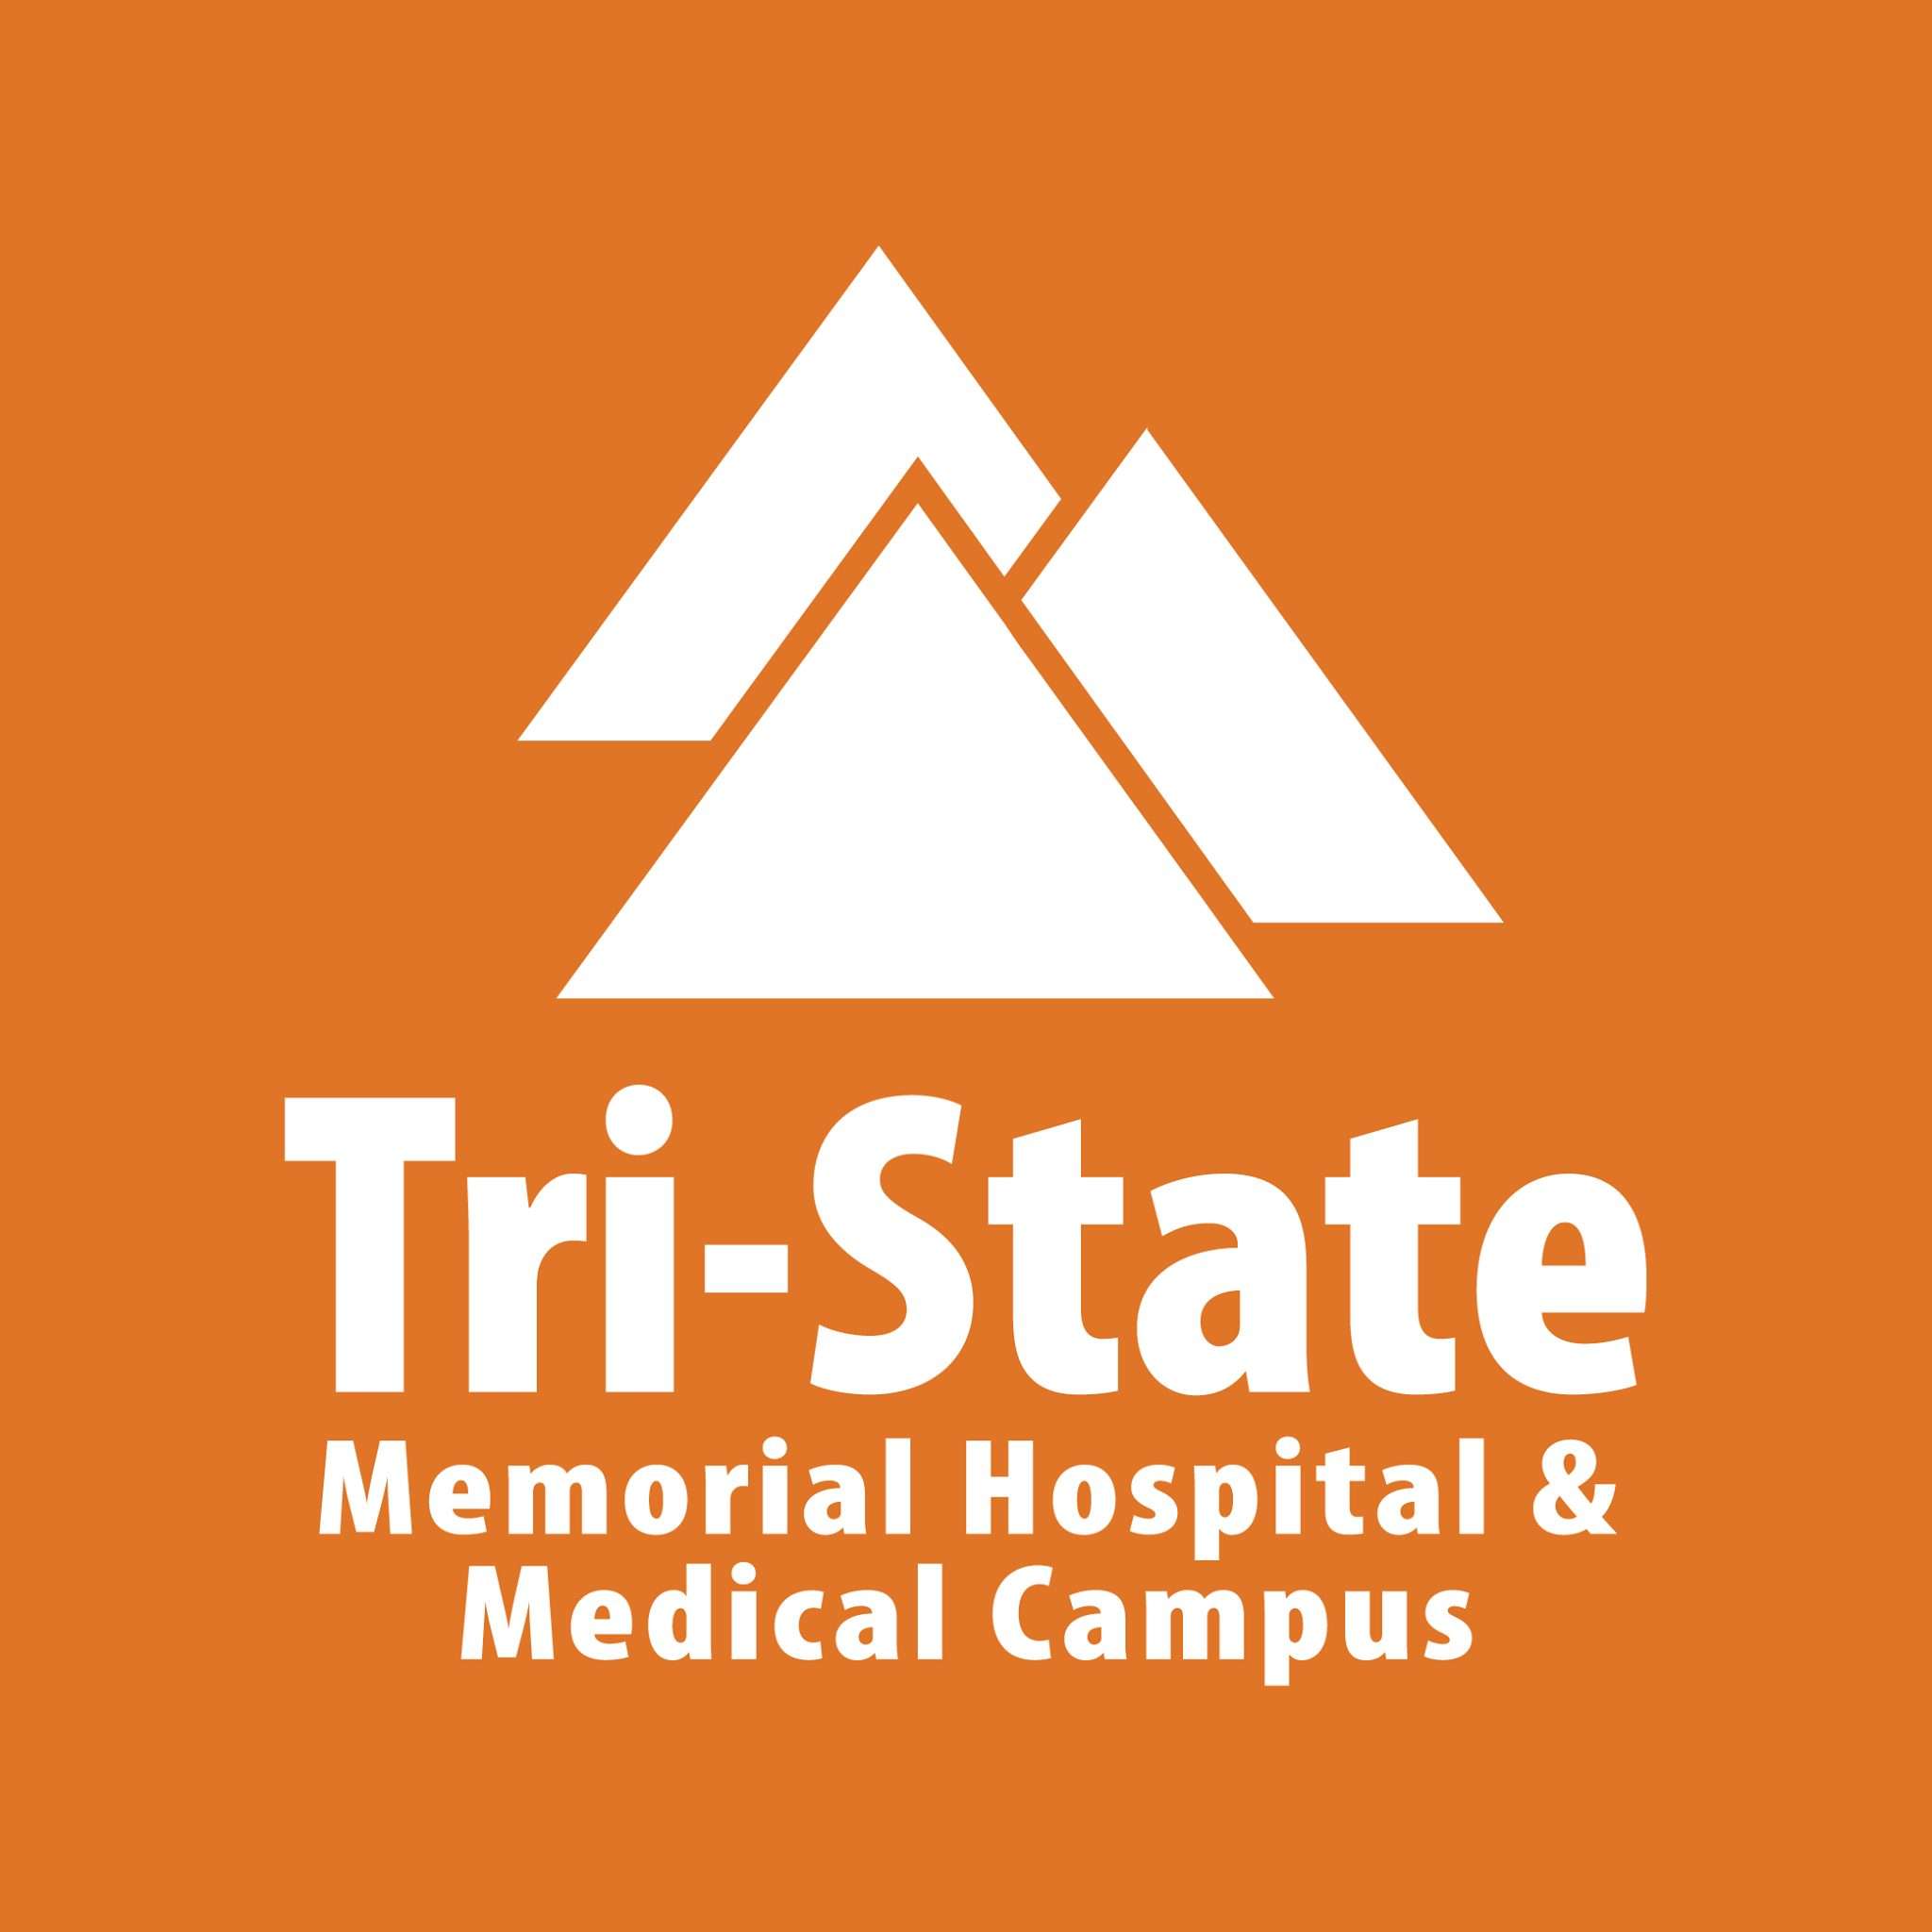 Tri-State Memorial Hospital & Medical Campus to Host Annual Free Sports Physicals Clinic